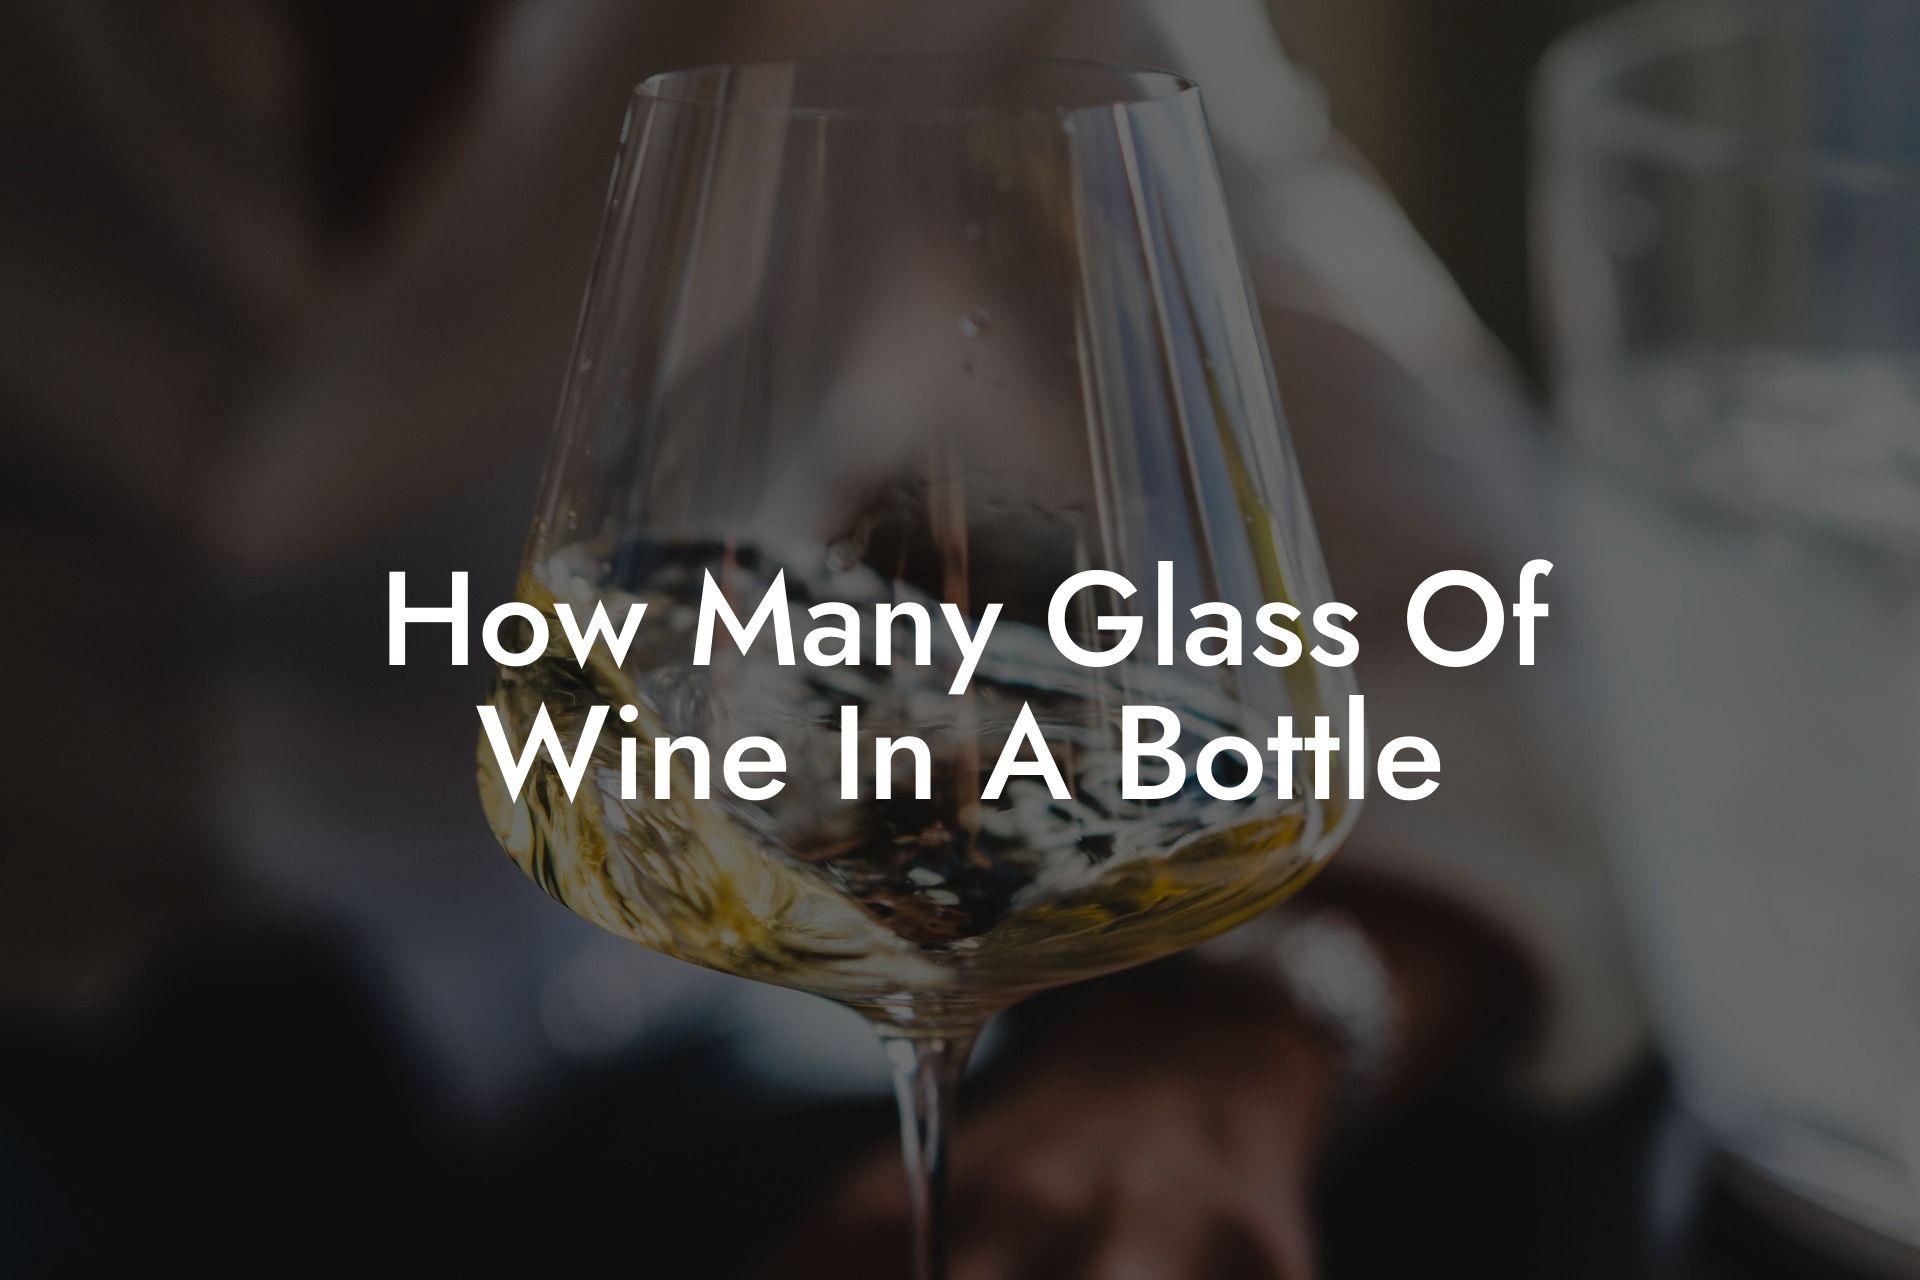 How Many Glass Of Wine In A Bottle